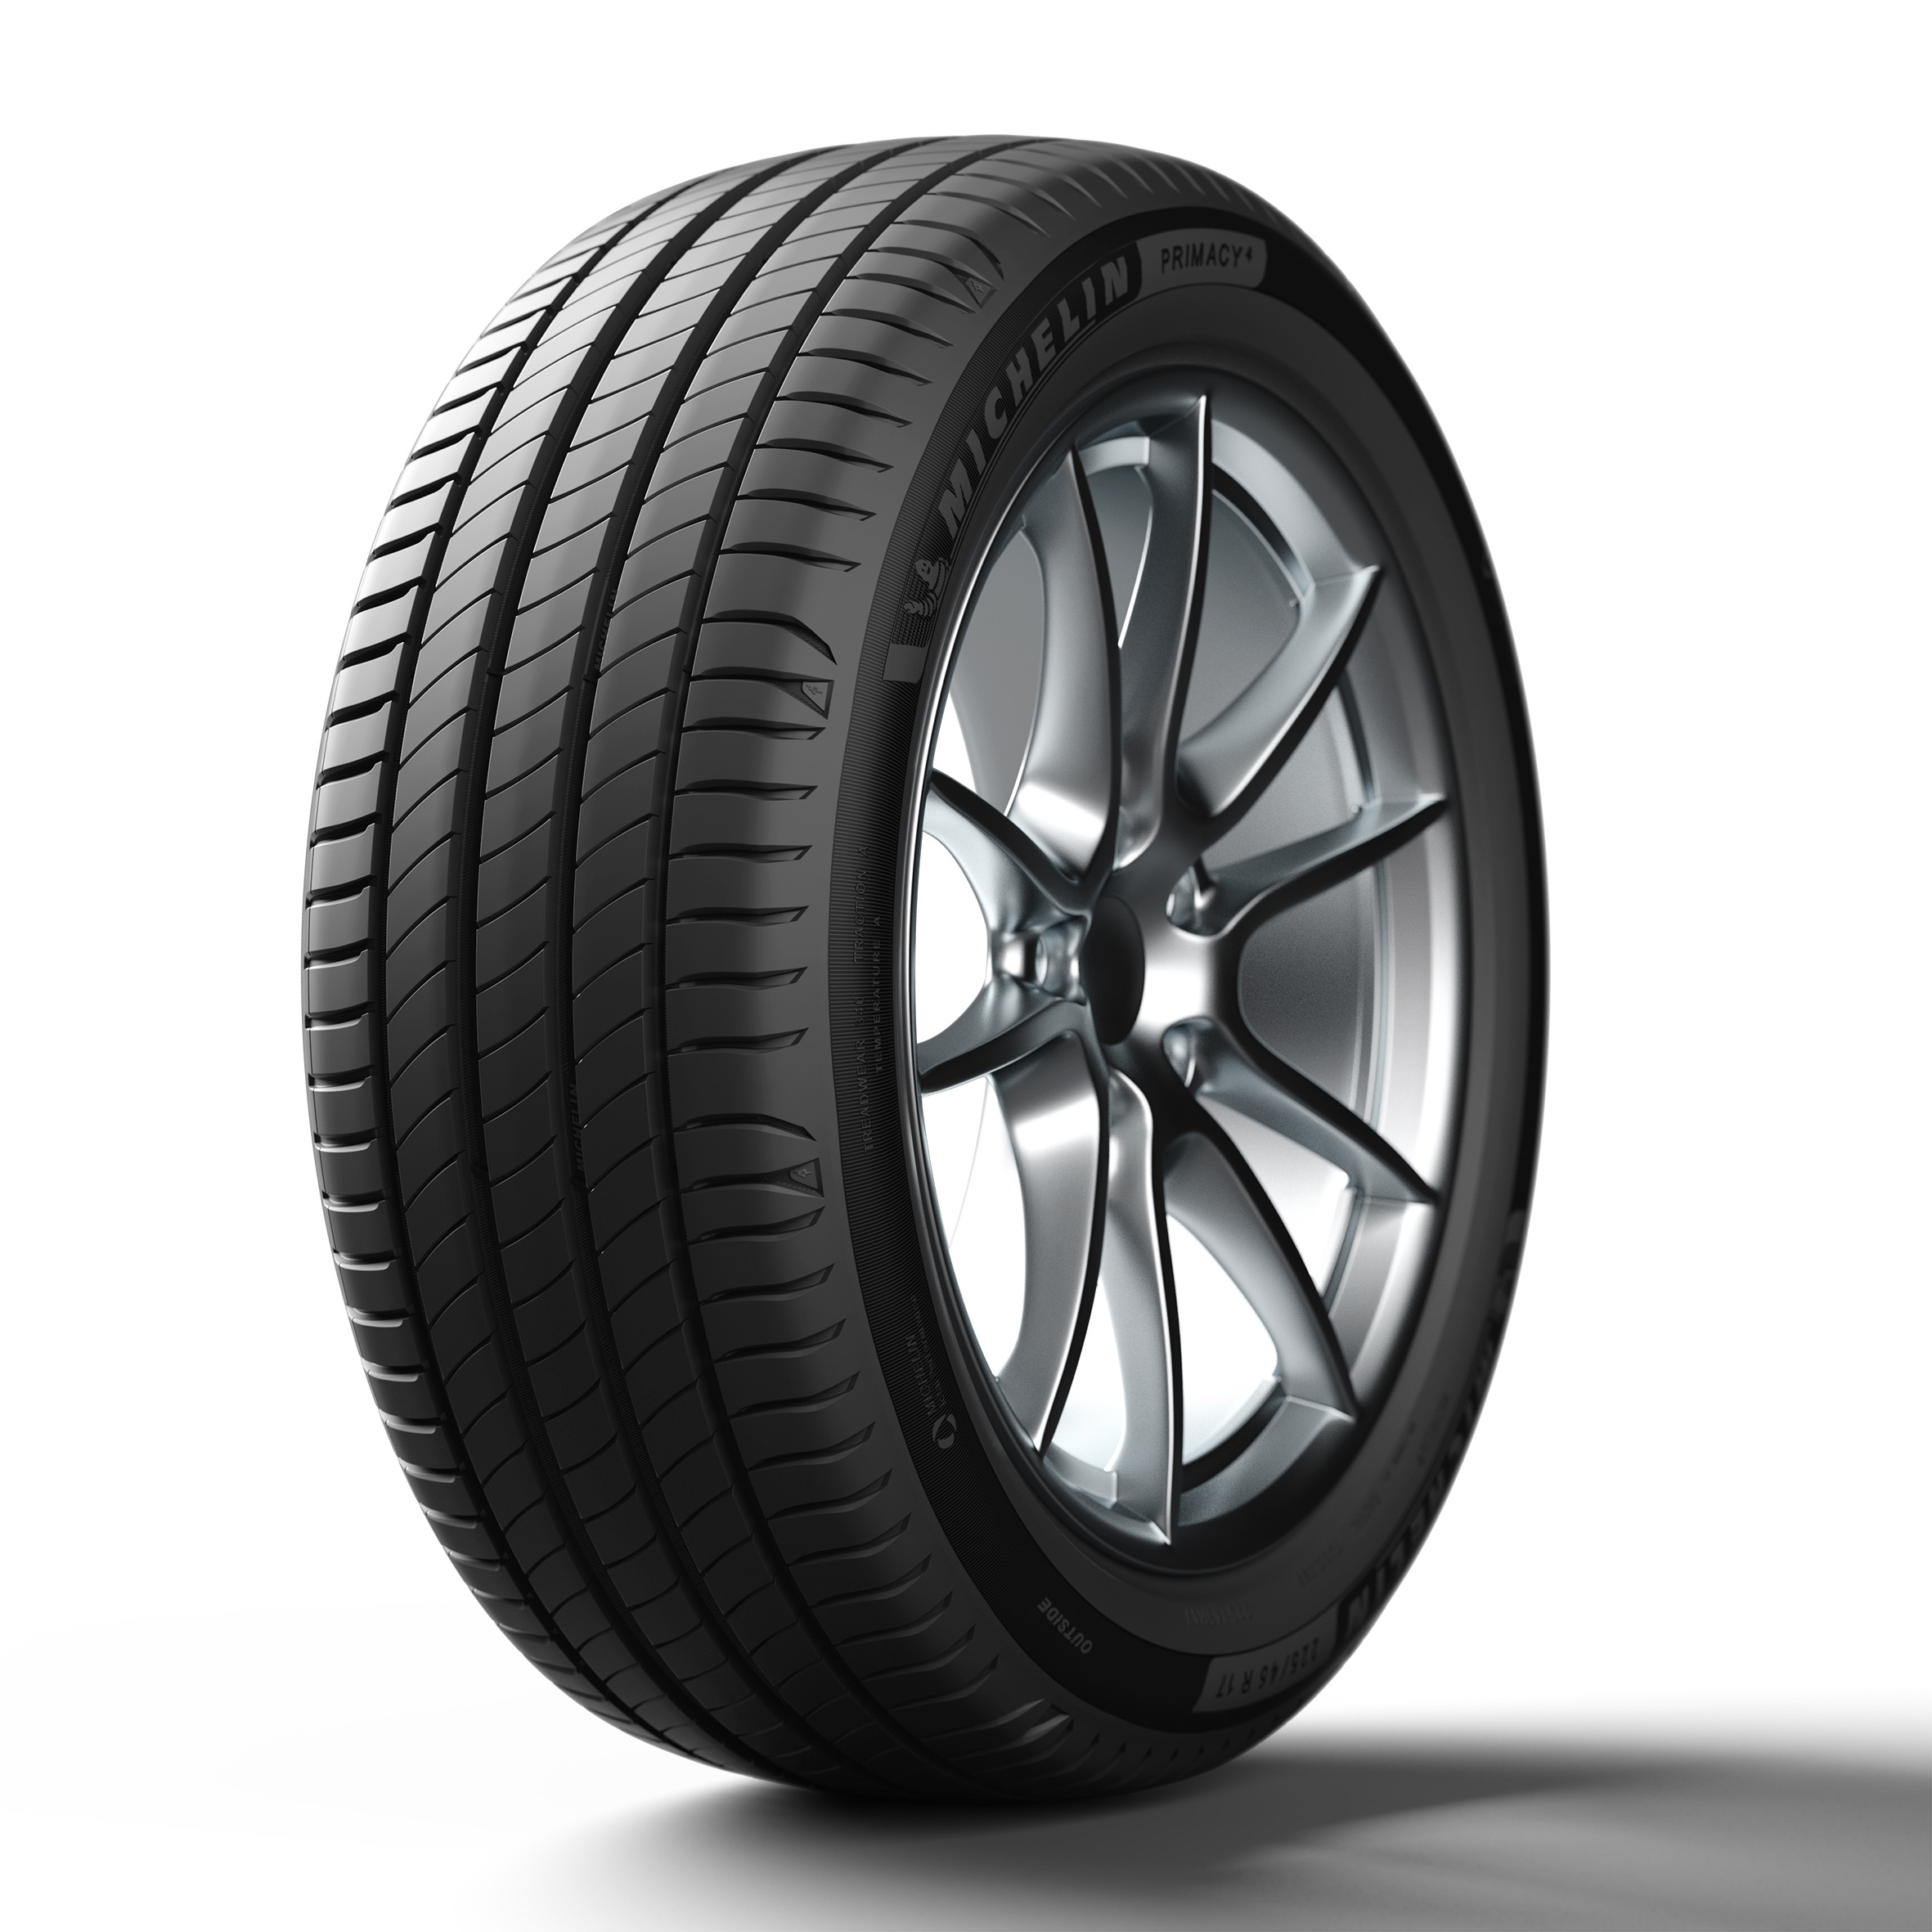 independent-tests-show-michelin-s-new-primacy-4-tyres-last-11-000-miles